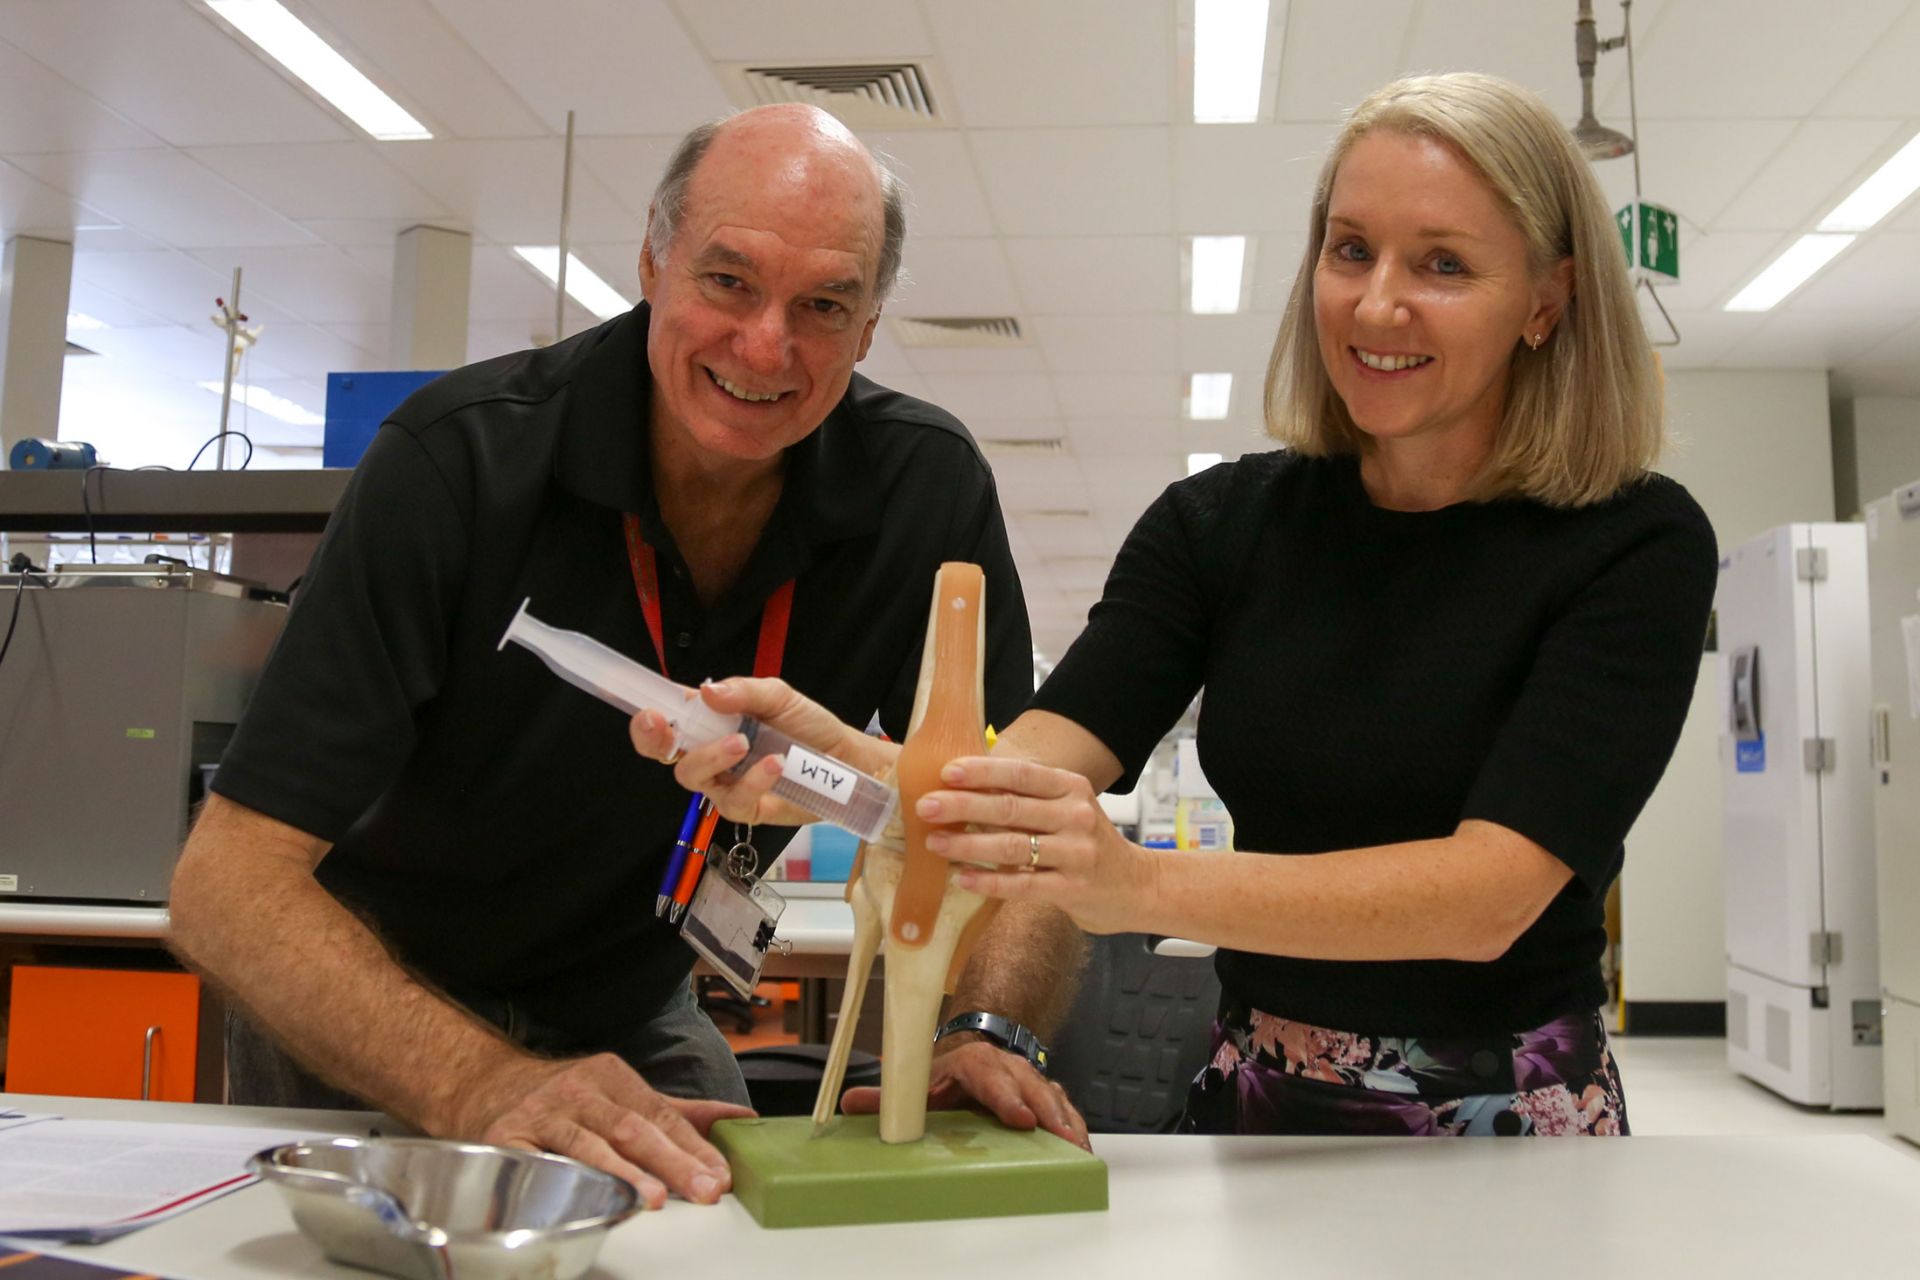 A male and a female pose with a plastic model of a knee joint